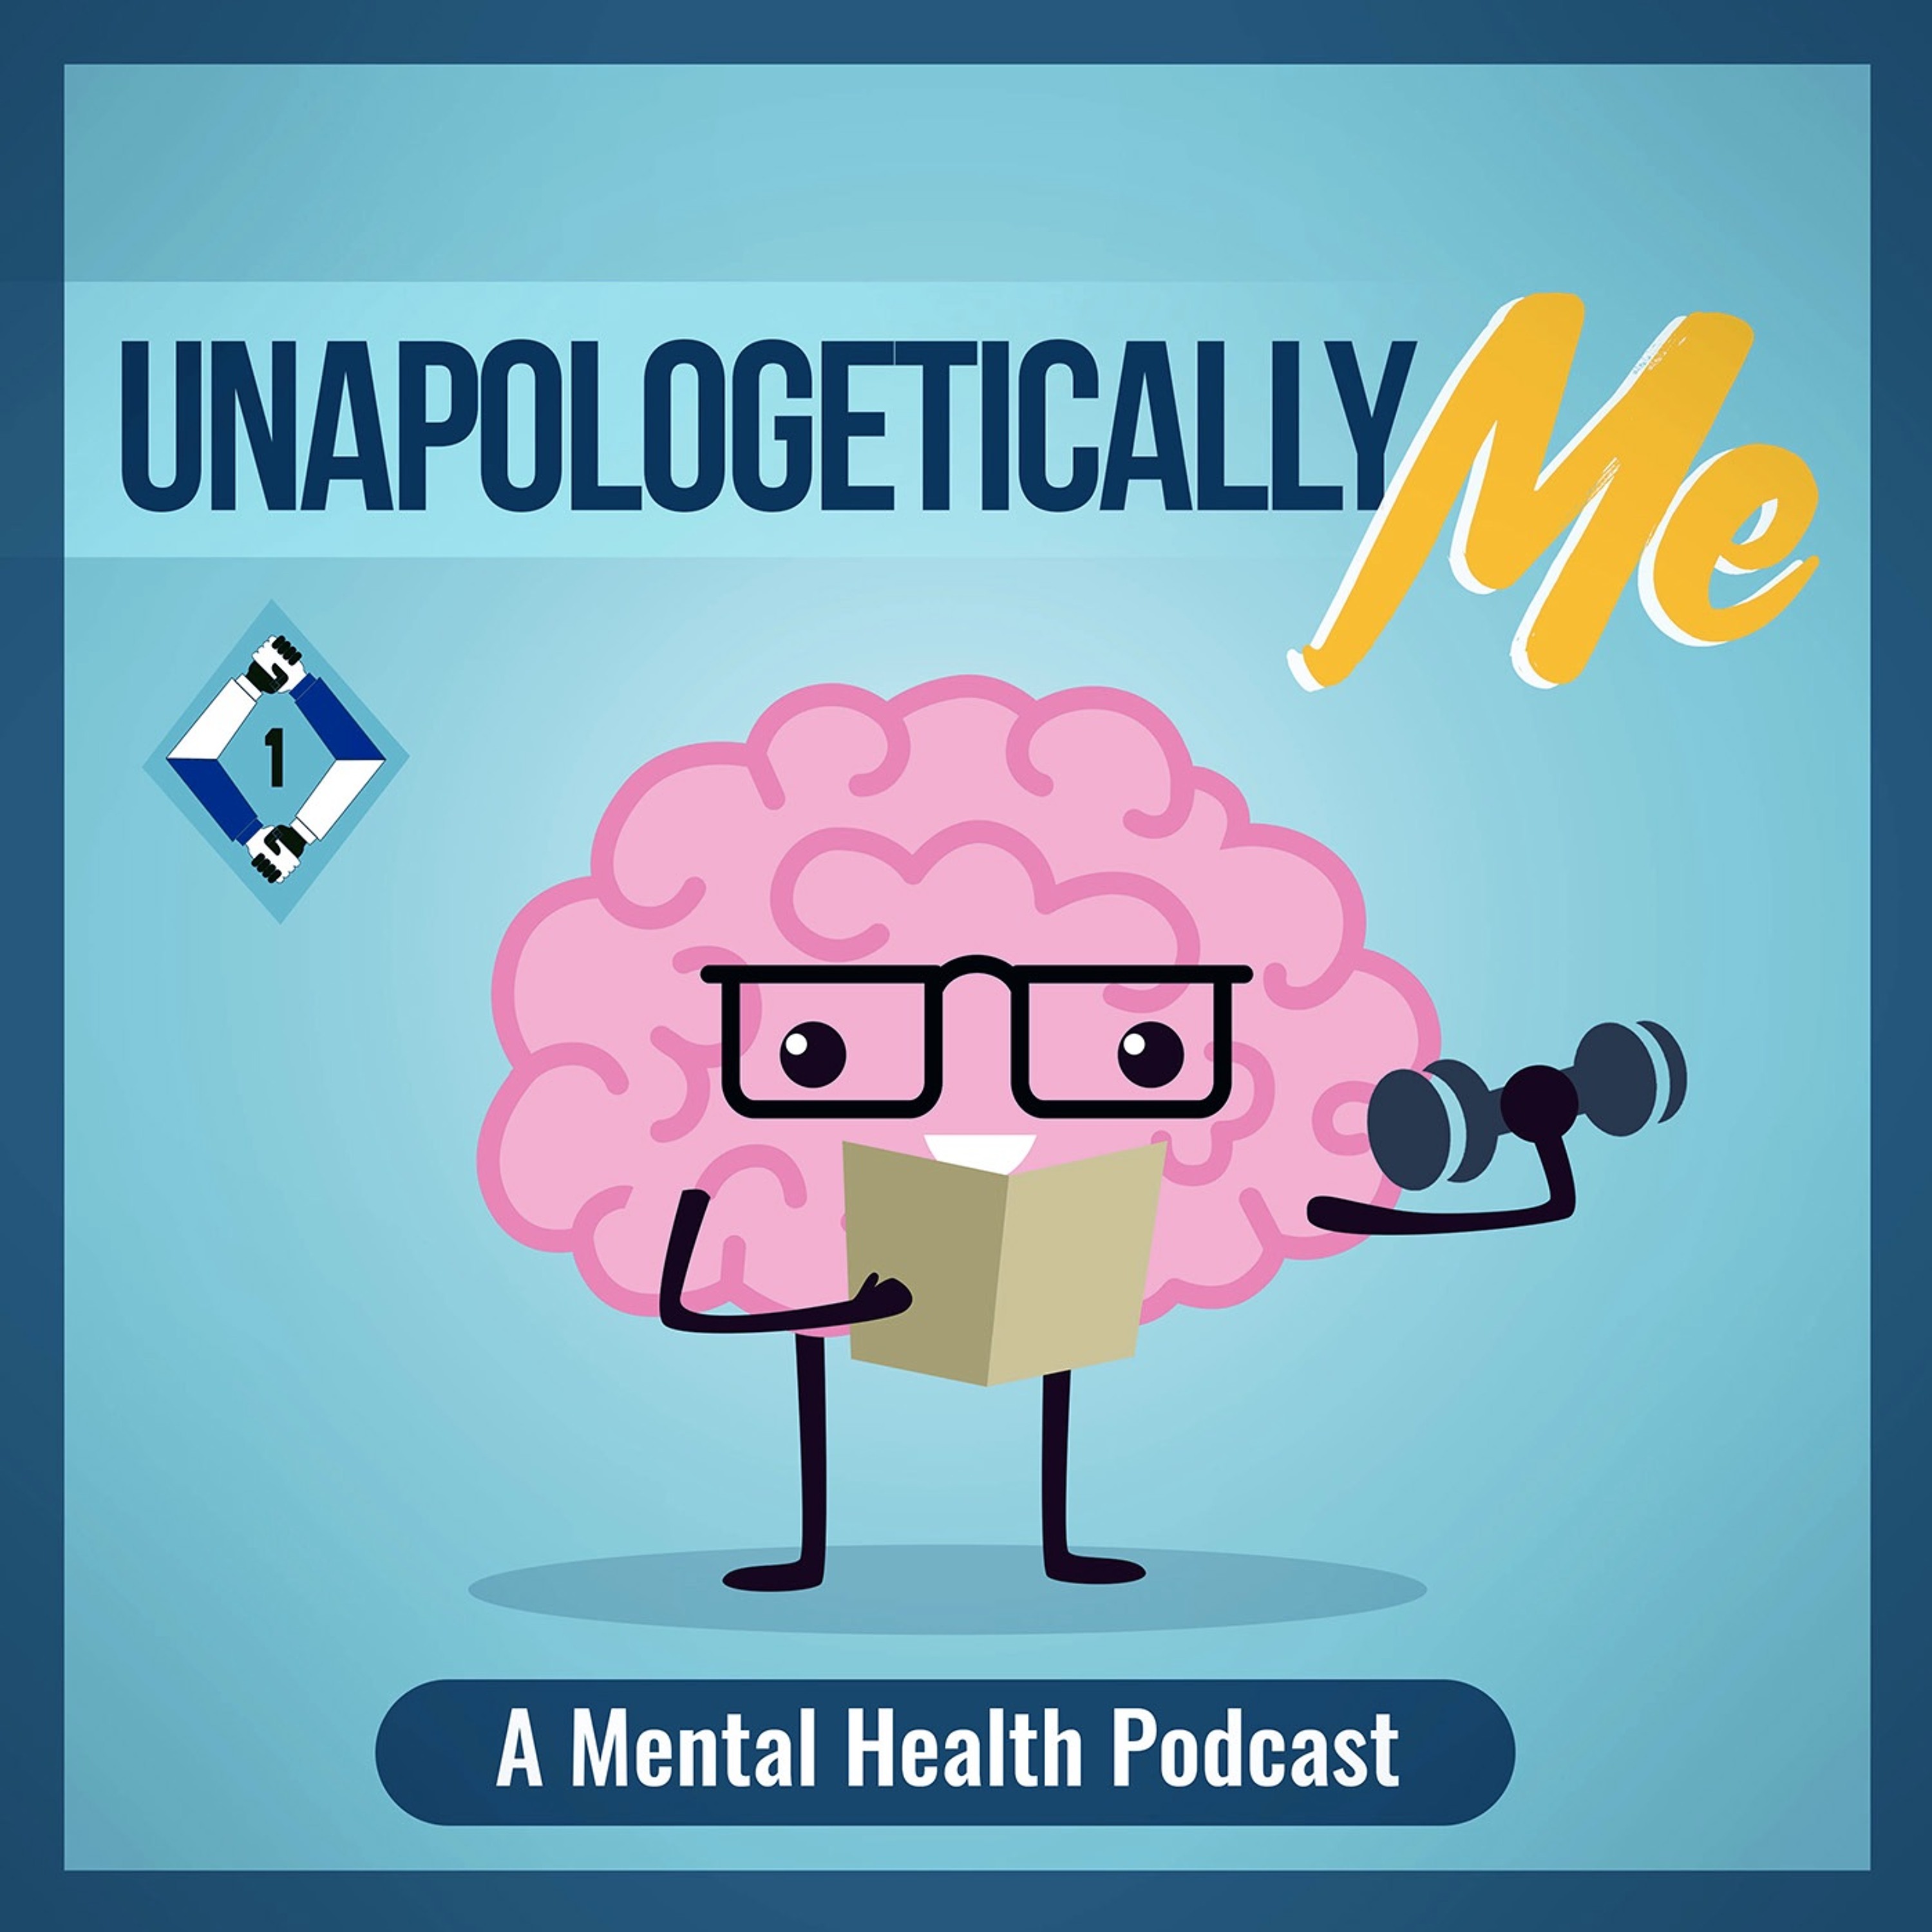 Unapologetically Me: A Mental Health Podcast - Health Tip Comp #7